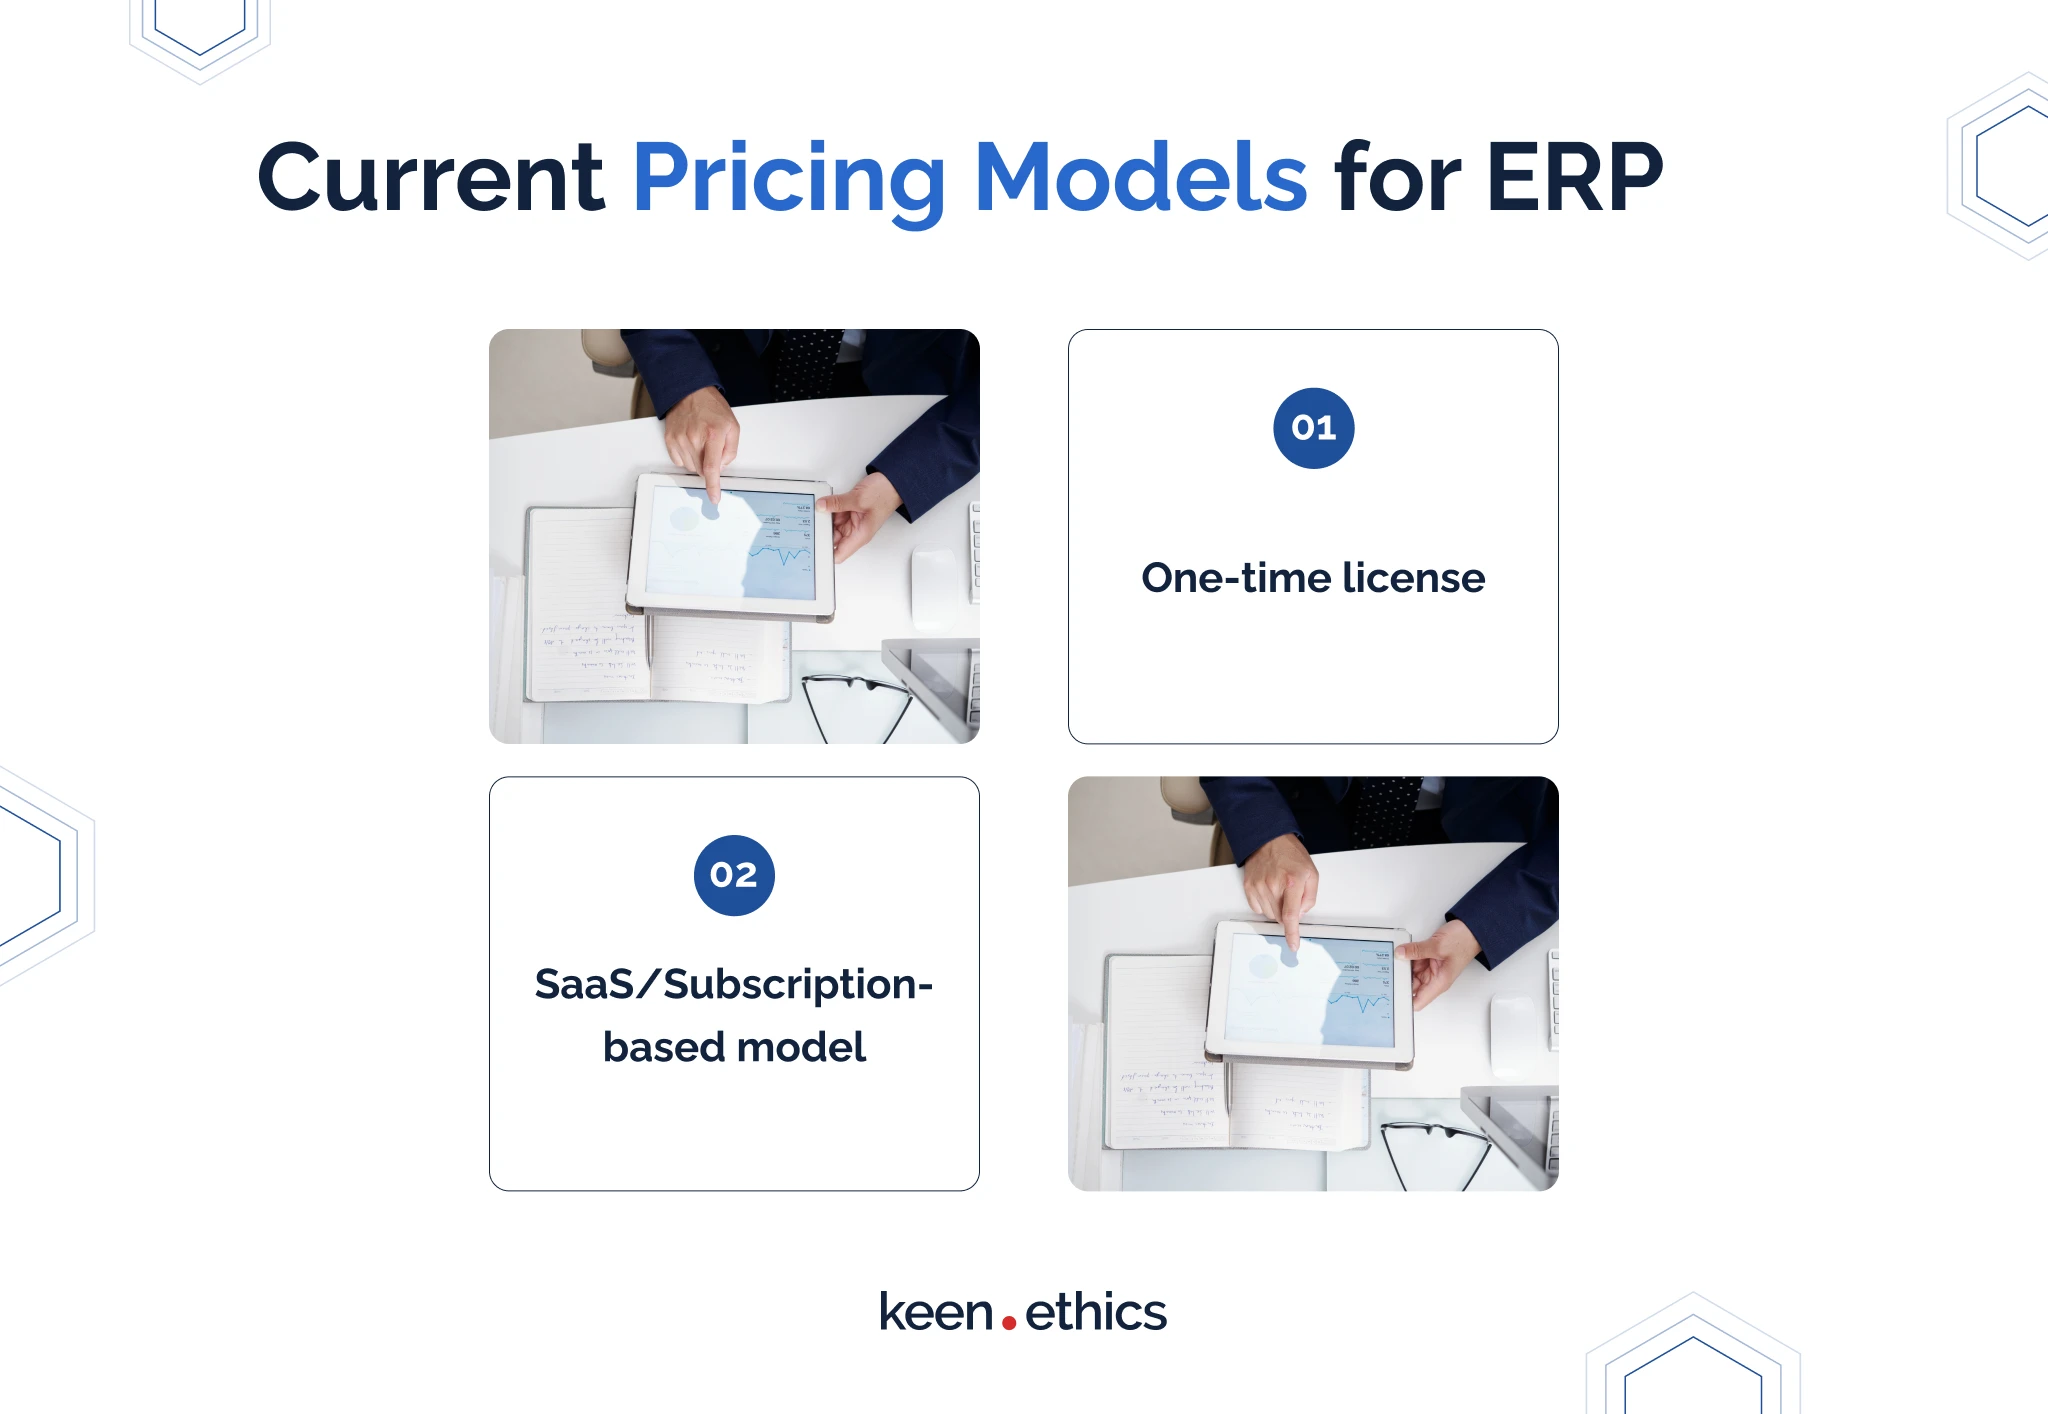 Current pricing models for ERP